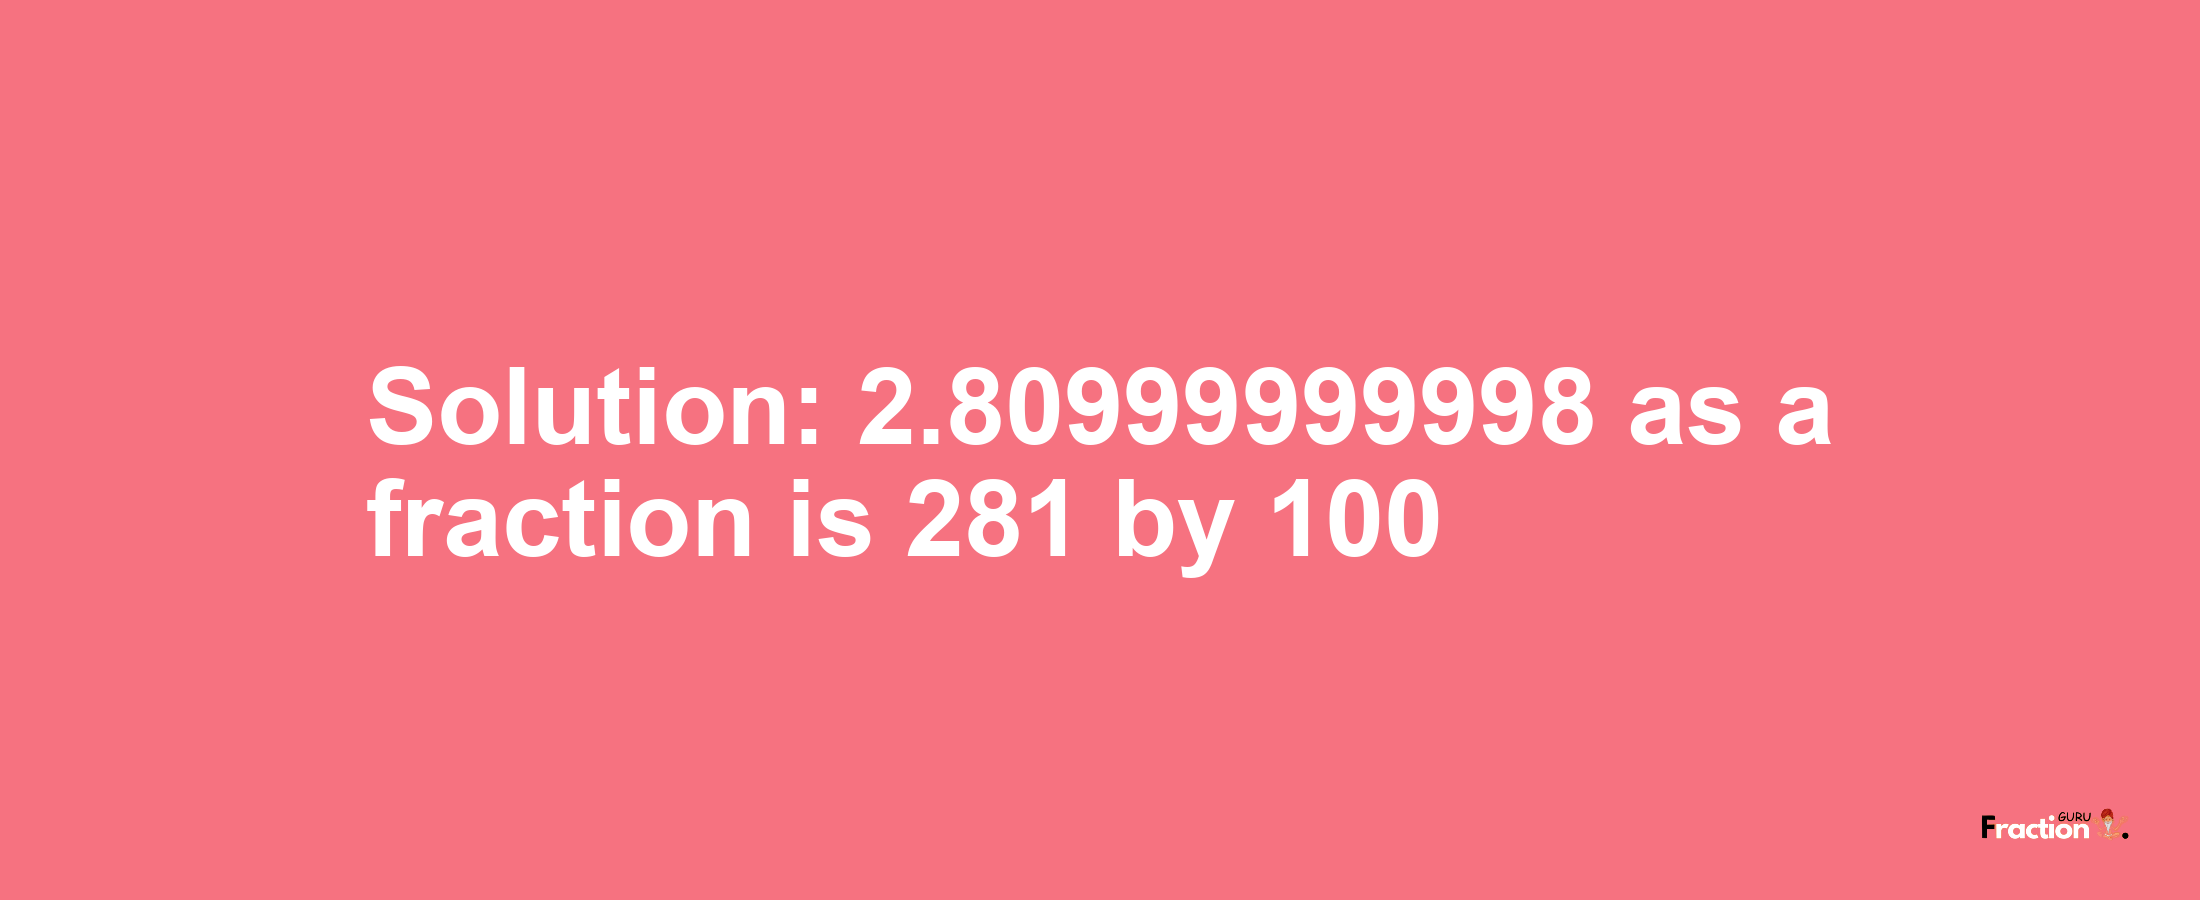 Solution:2.80999999998 as a fraction is 281/100